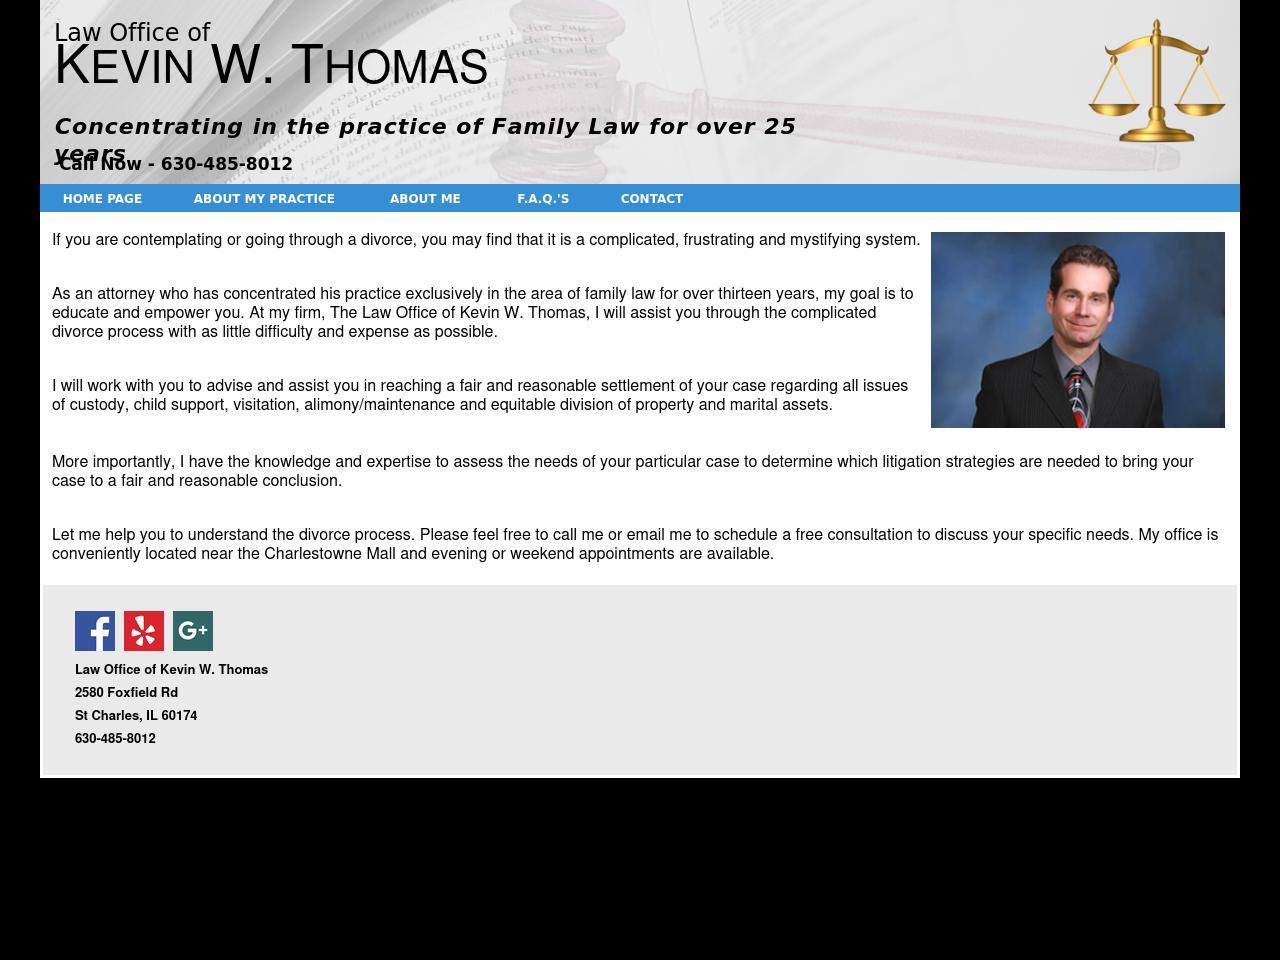 The Law Office of Kevin W. Thomas - St. Charles IL Lawyers